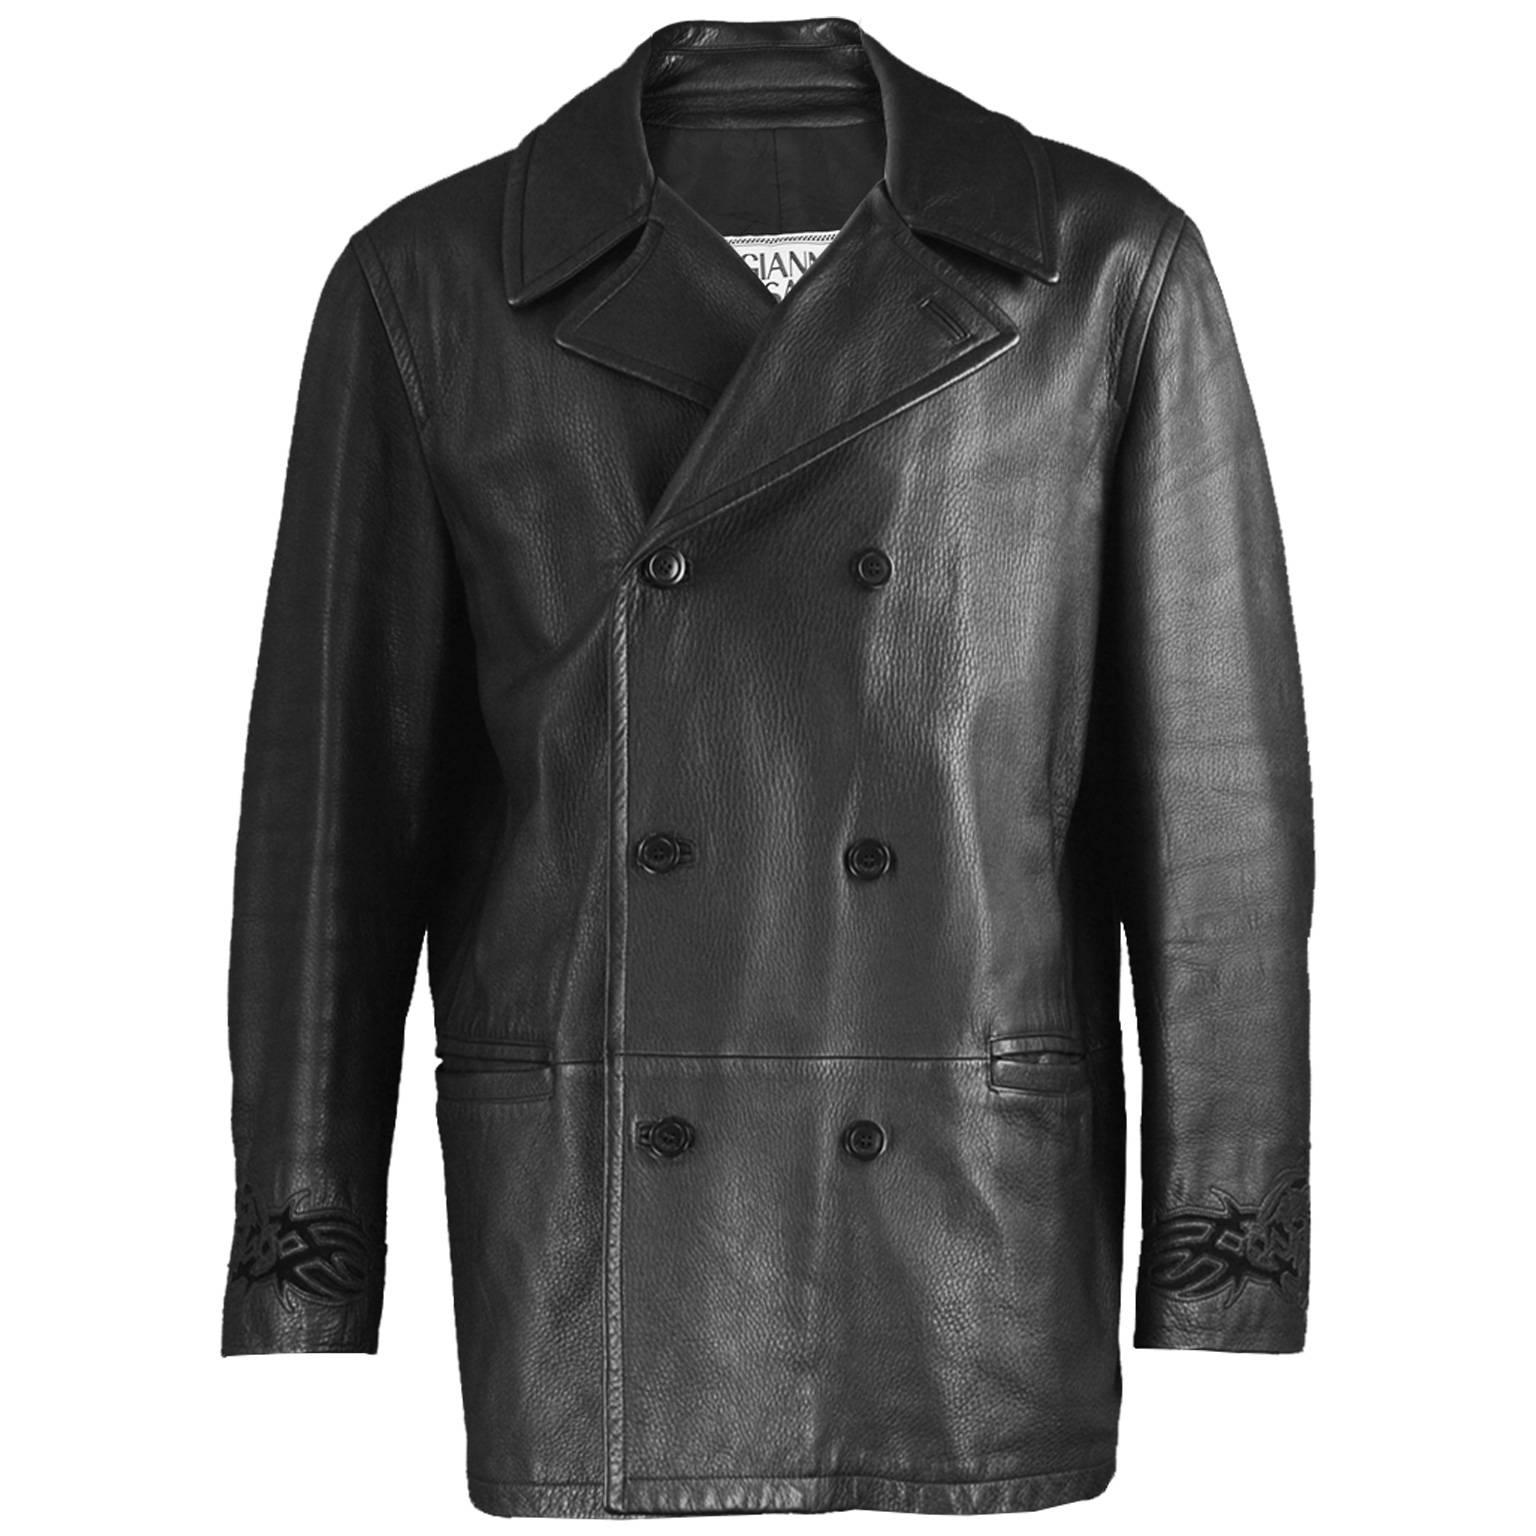 Gianni Versace Men's Black Leather Double Breasted Jacket, A/W 2002  For Sale